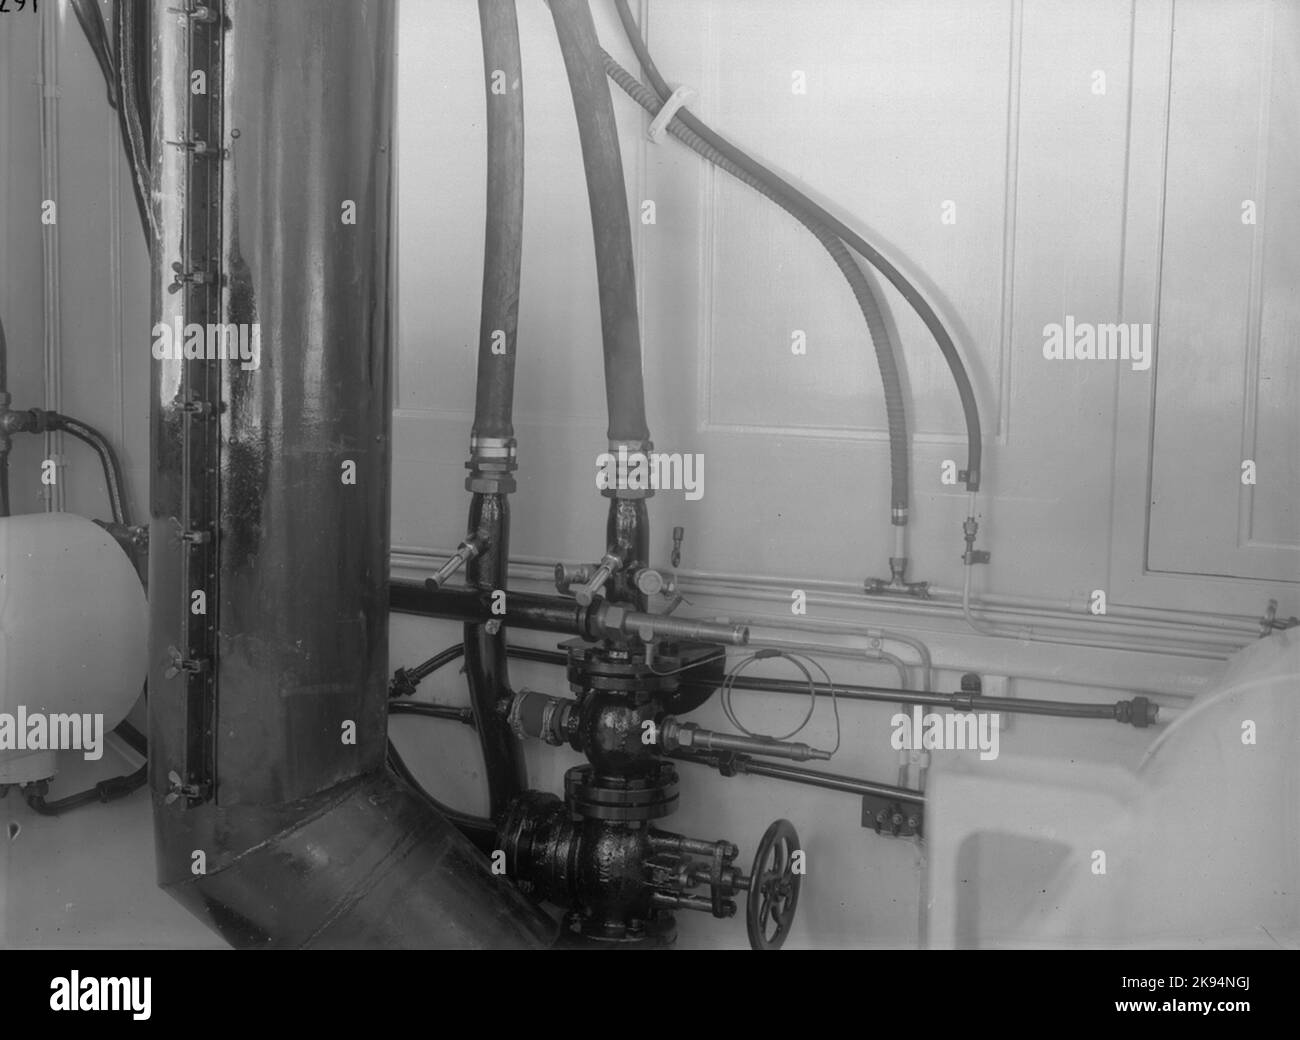 VBHJ MBC0 2, Pipe drawing in engine room Stock Photo - Alamy